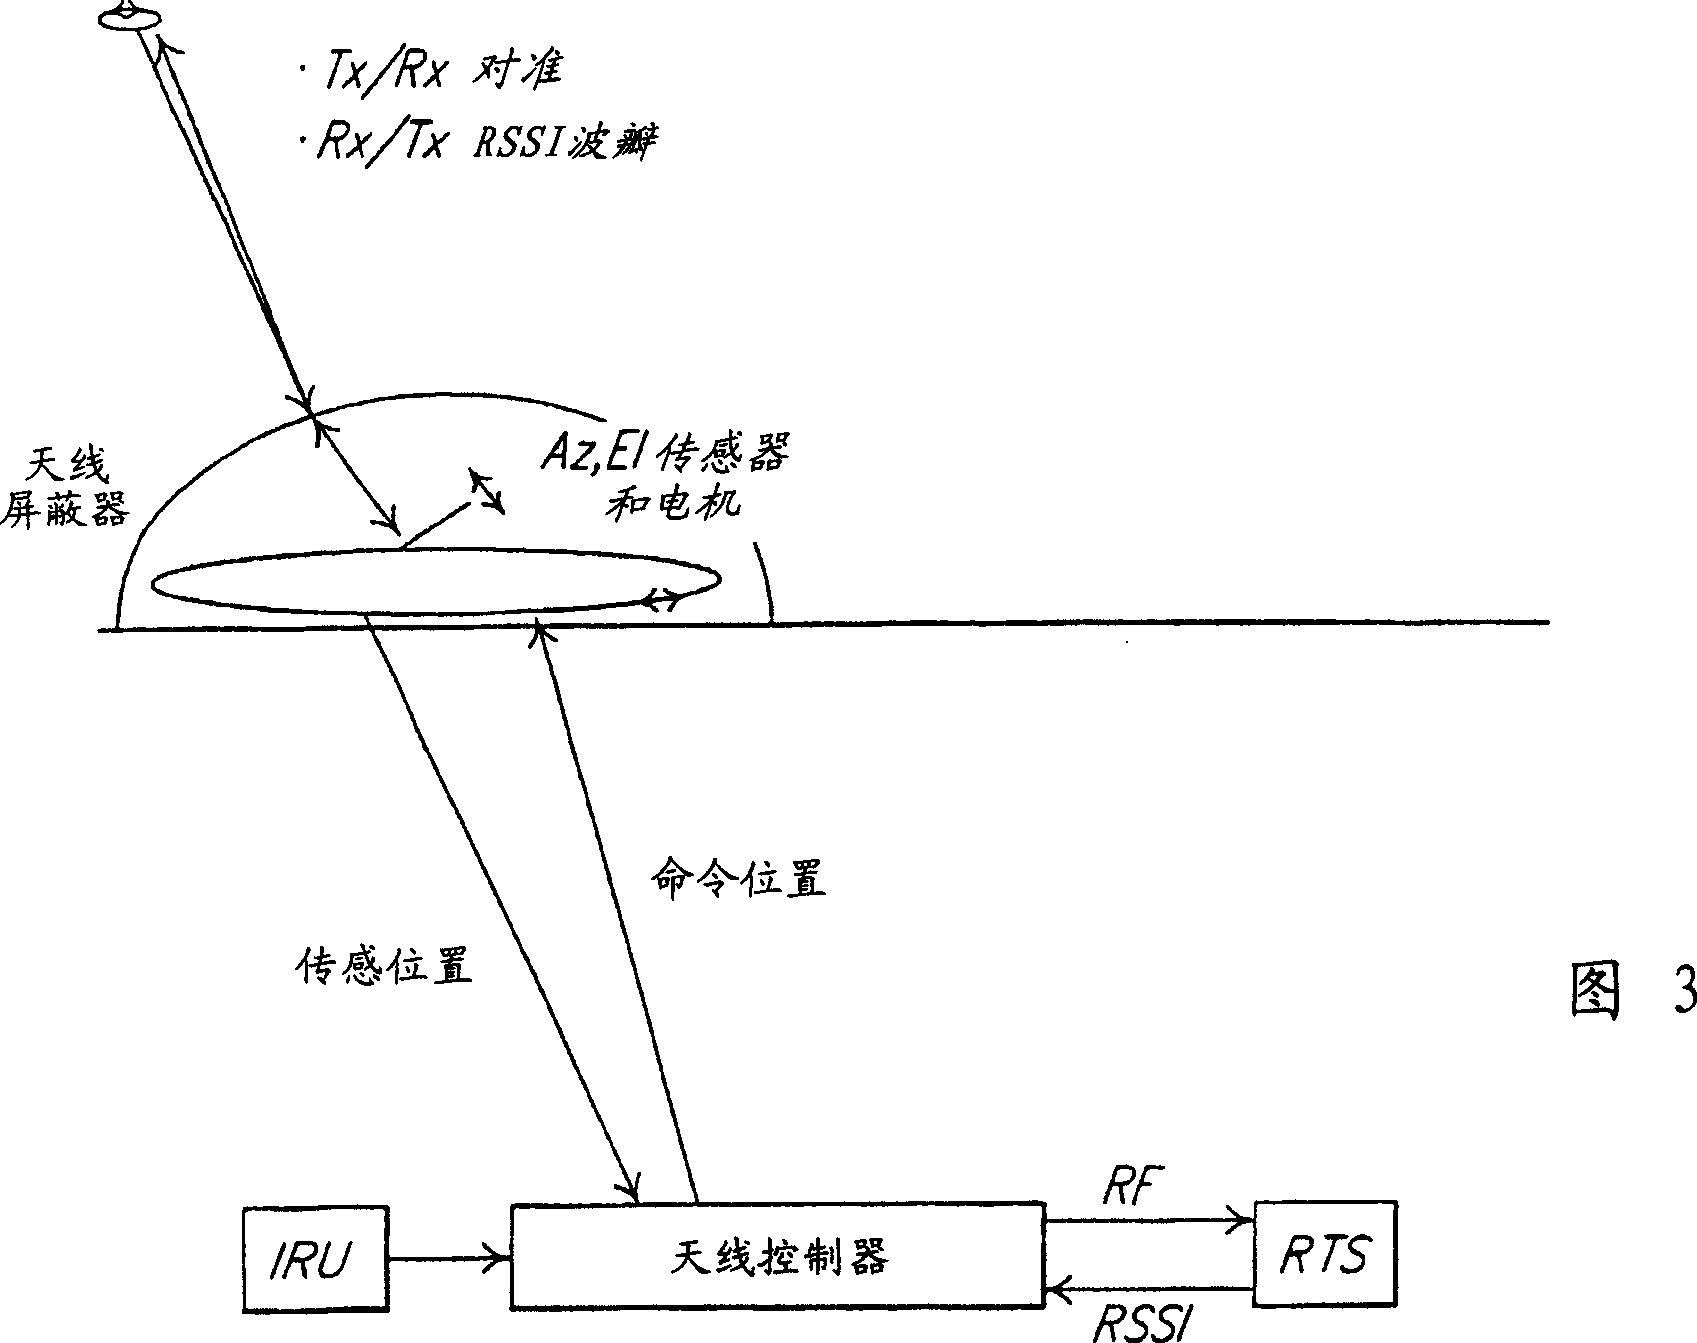 Method for accurately tracking and communicating with a satellite from a mobile platform